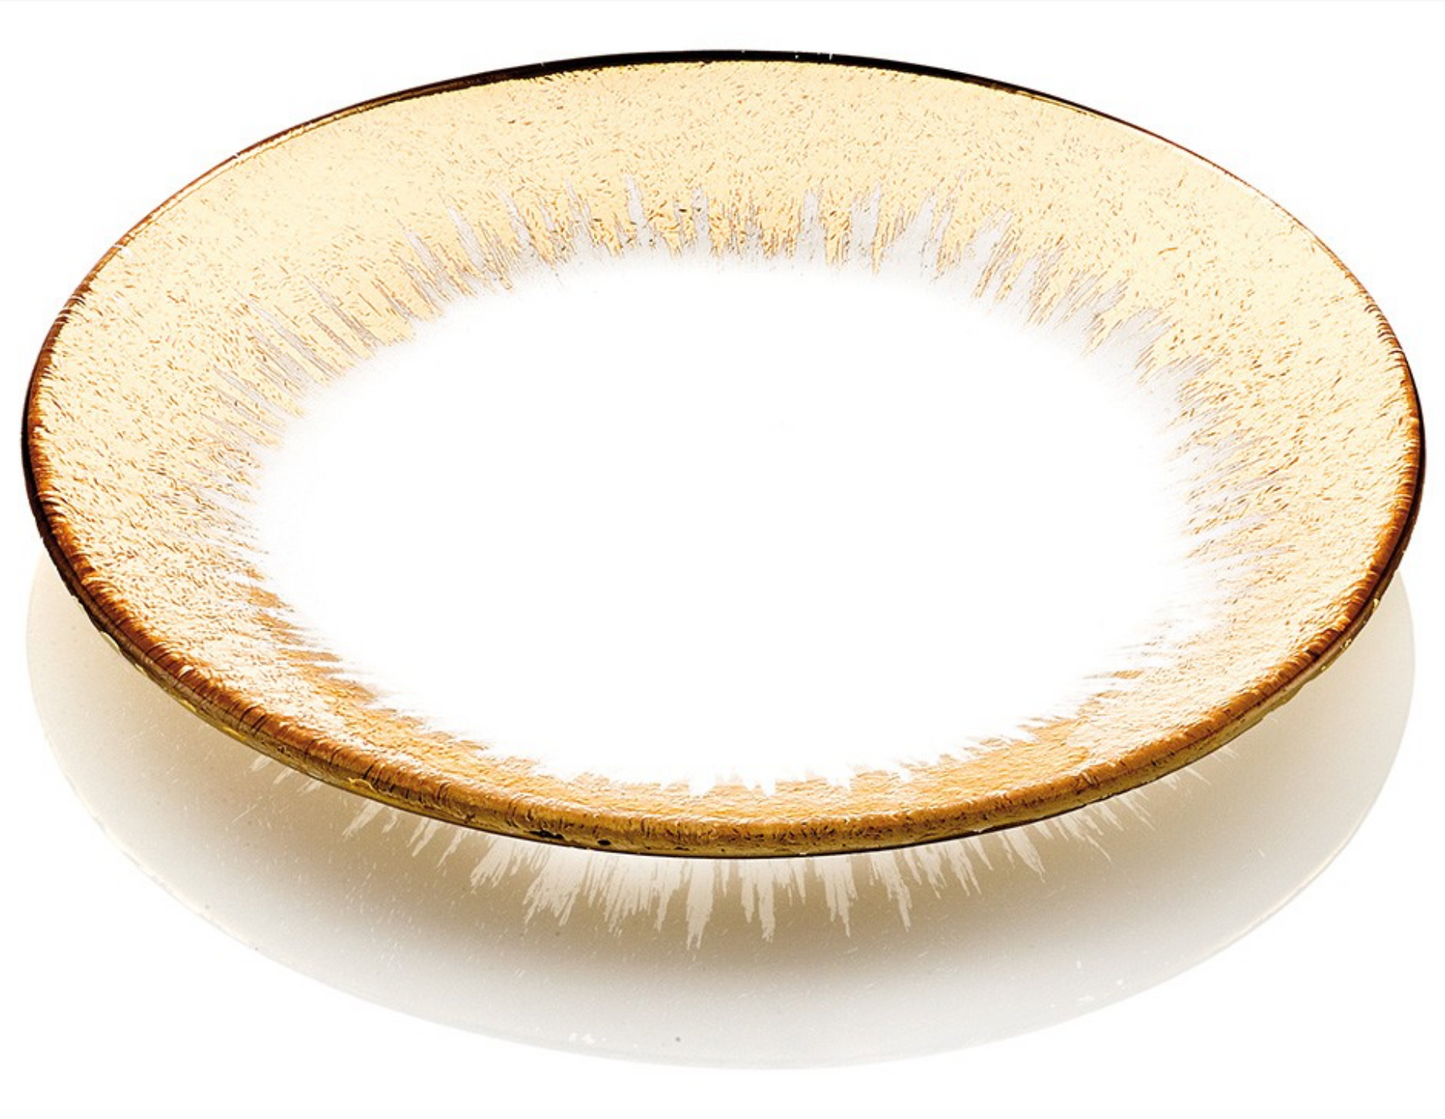 IVV Orizzonte Plate 28cm Clear Gold Decoration